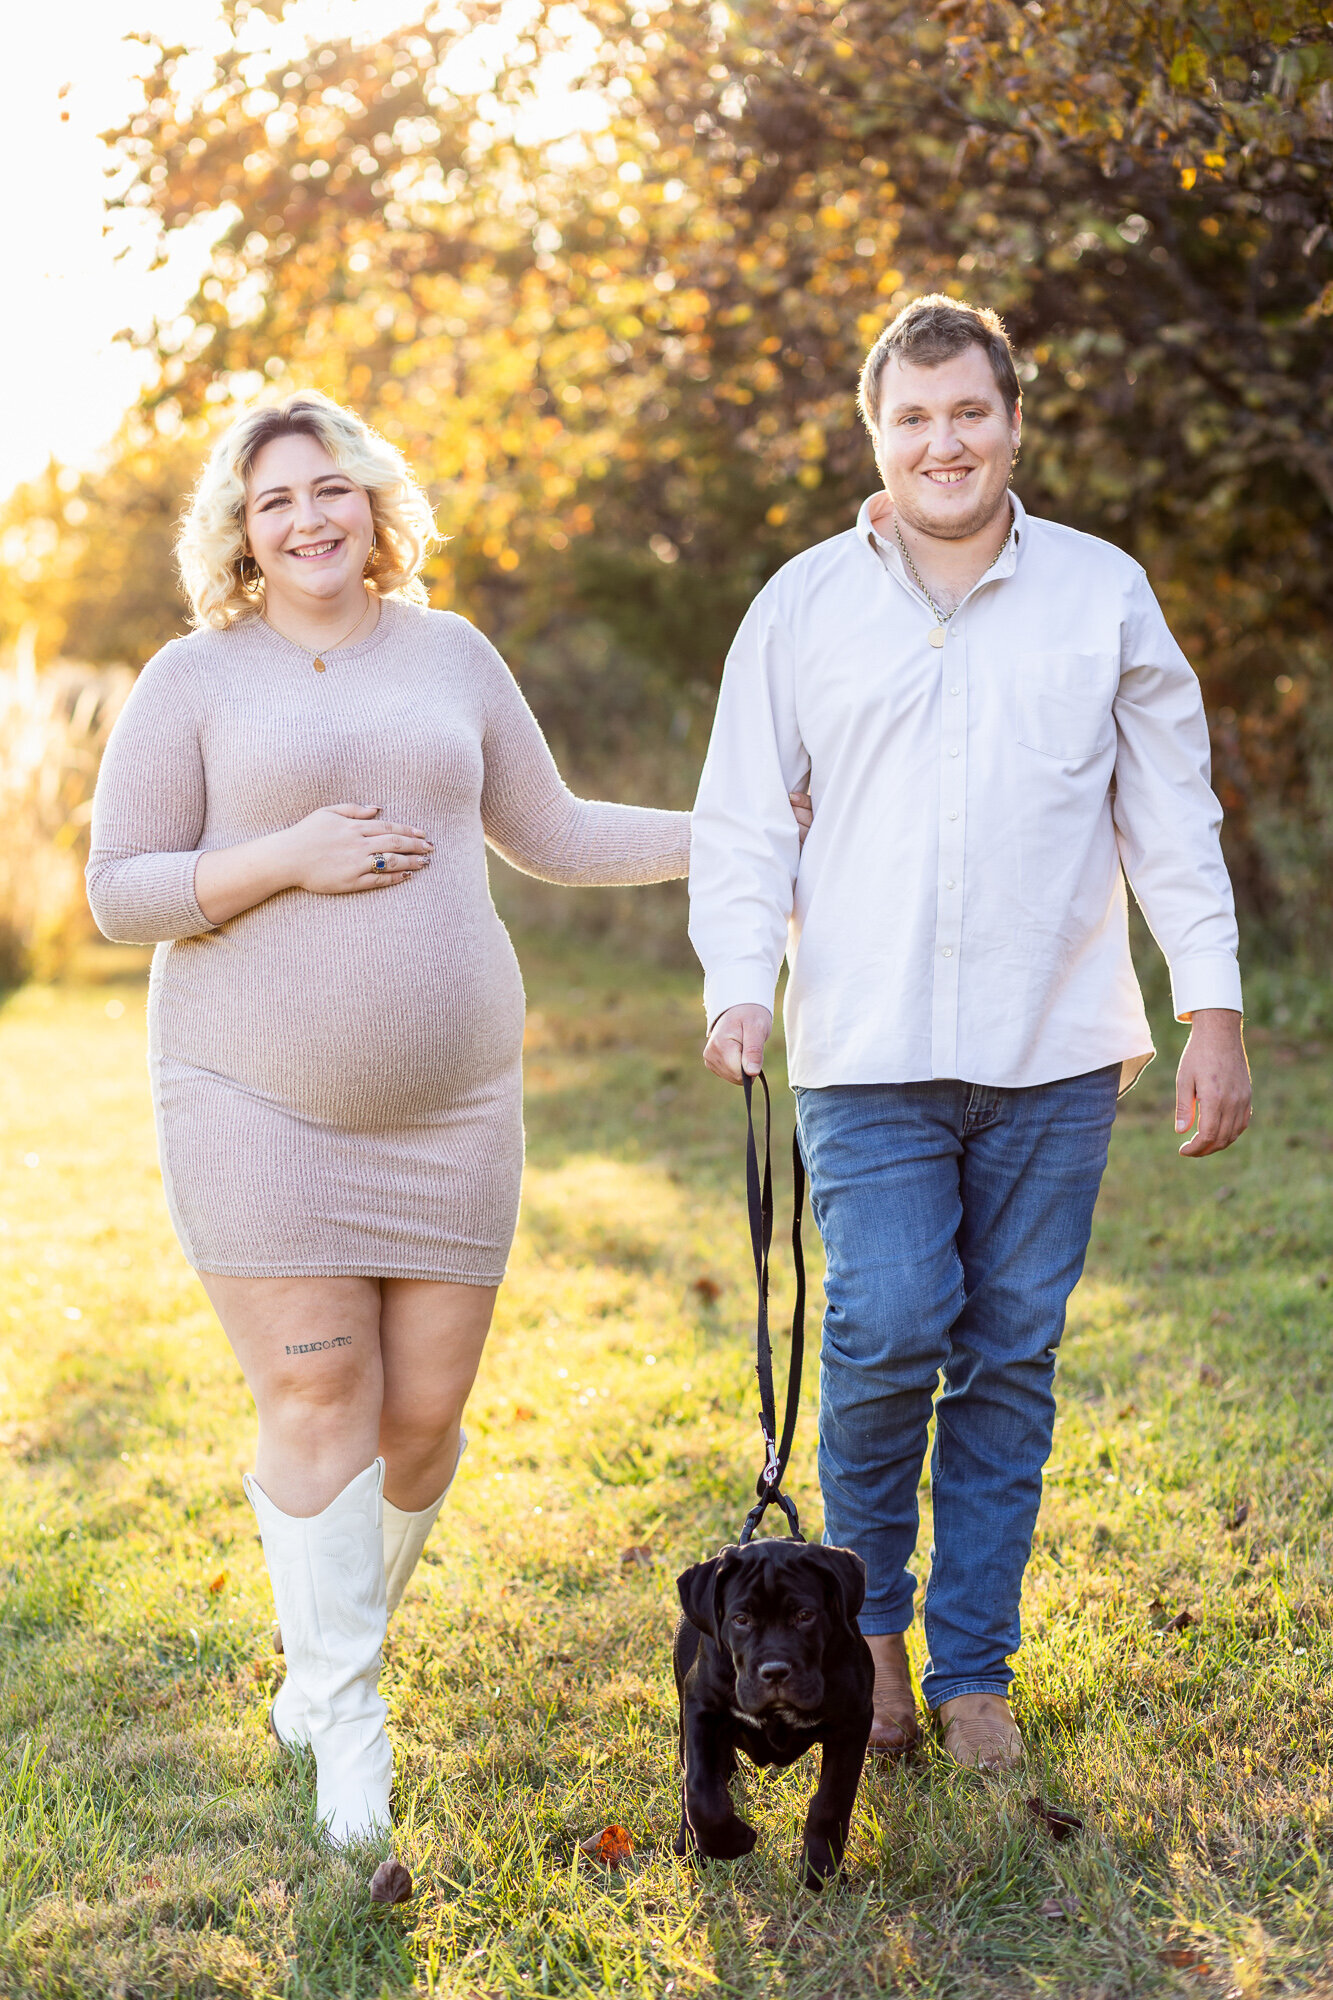 Maternity-outdoor-photography-session-golden-hour-Frankfort-Kentucky-photographer-4